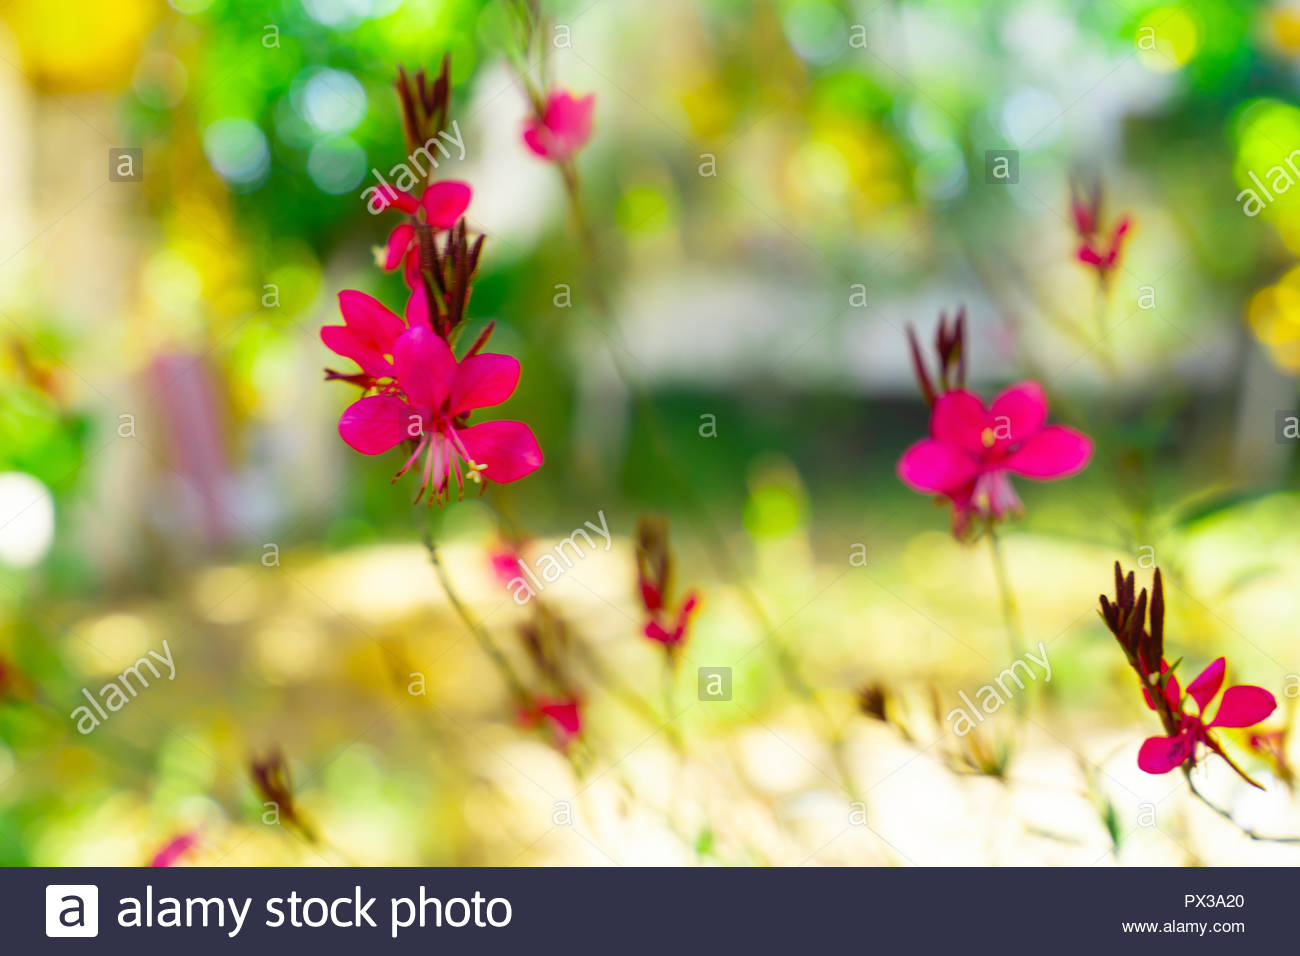 Green and pink bokeh out of focus background from gaura